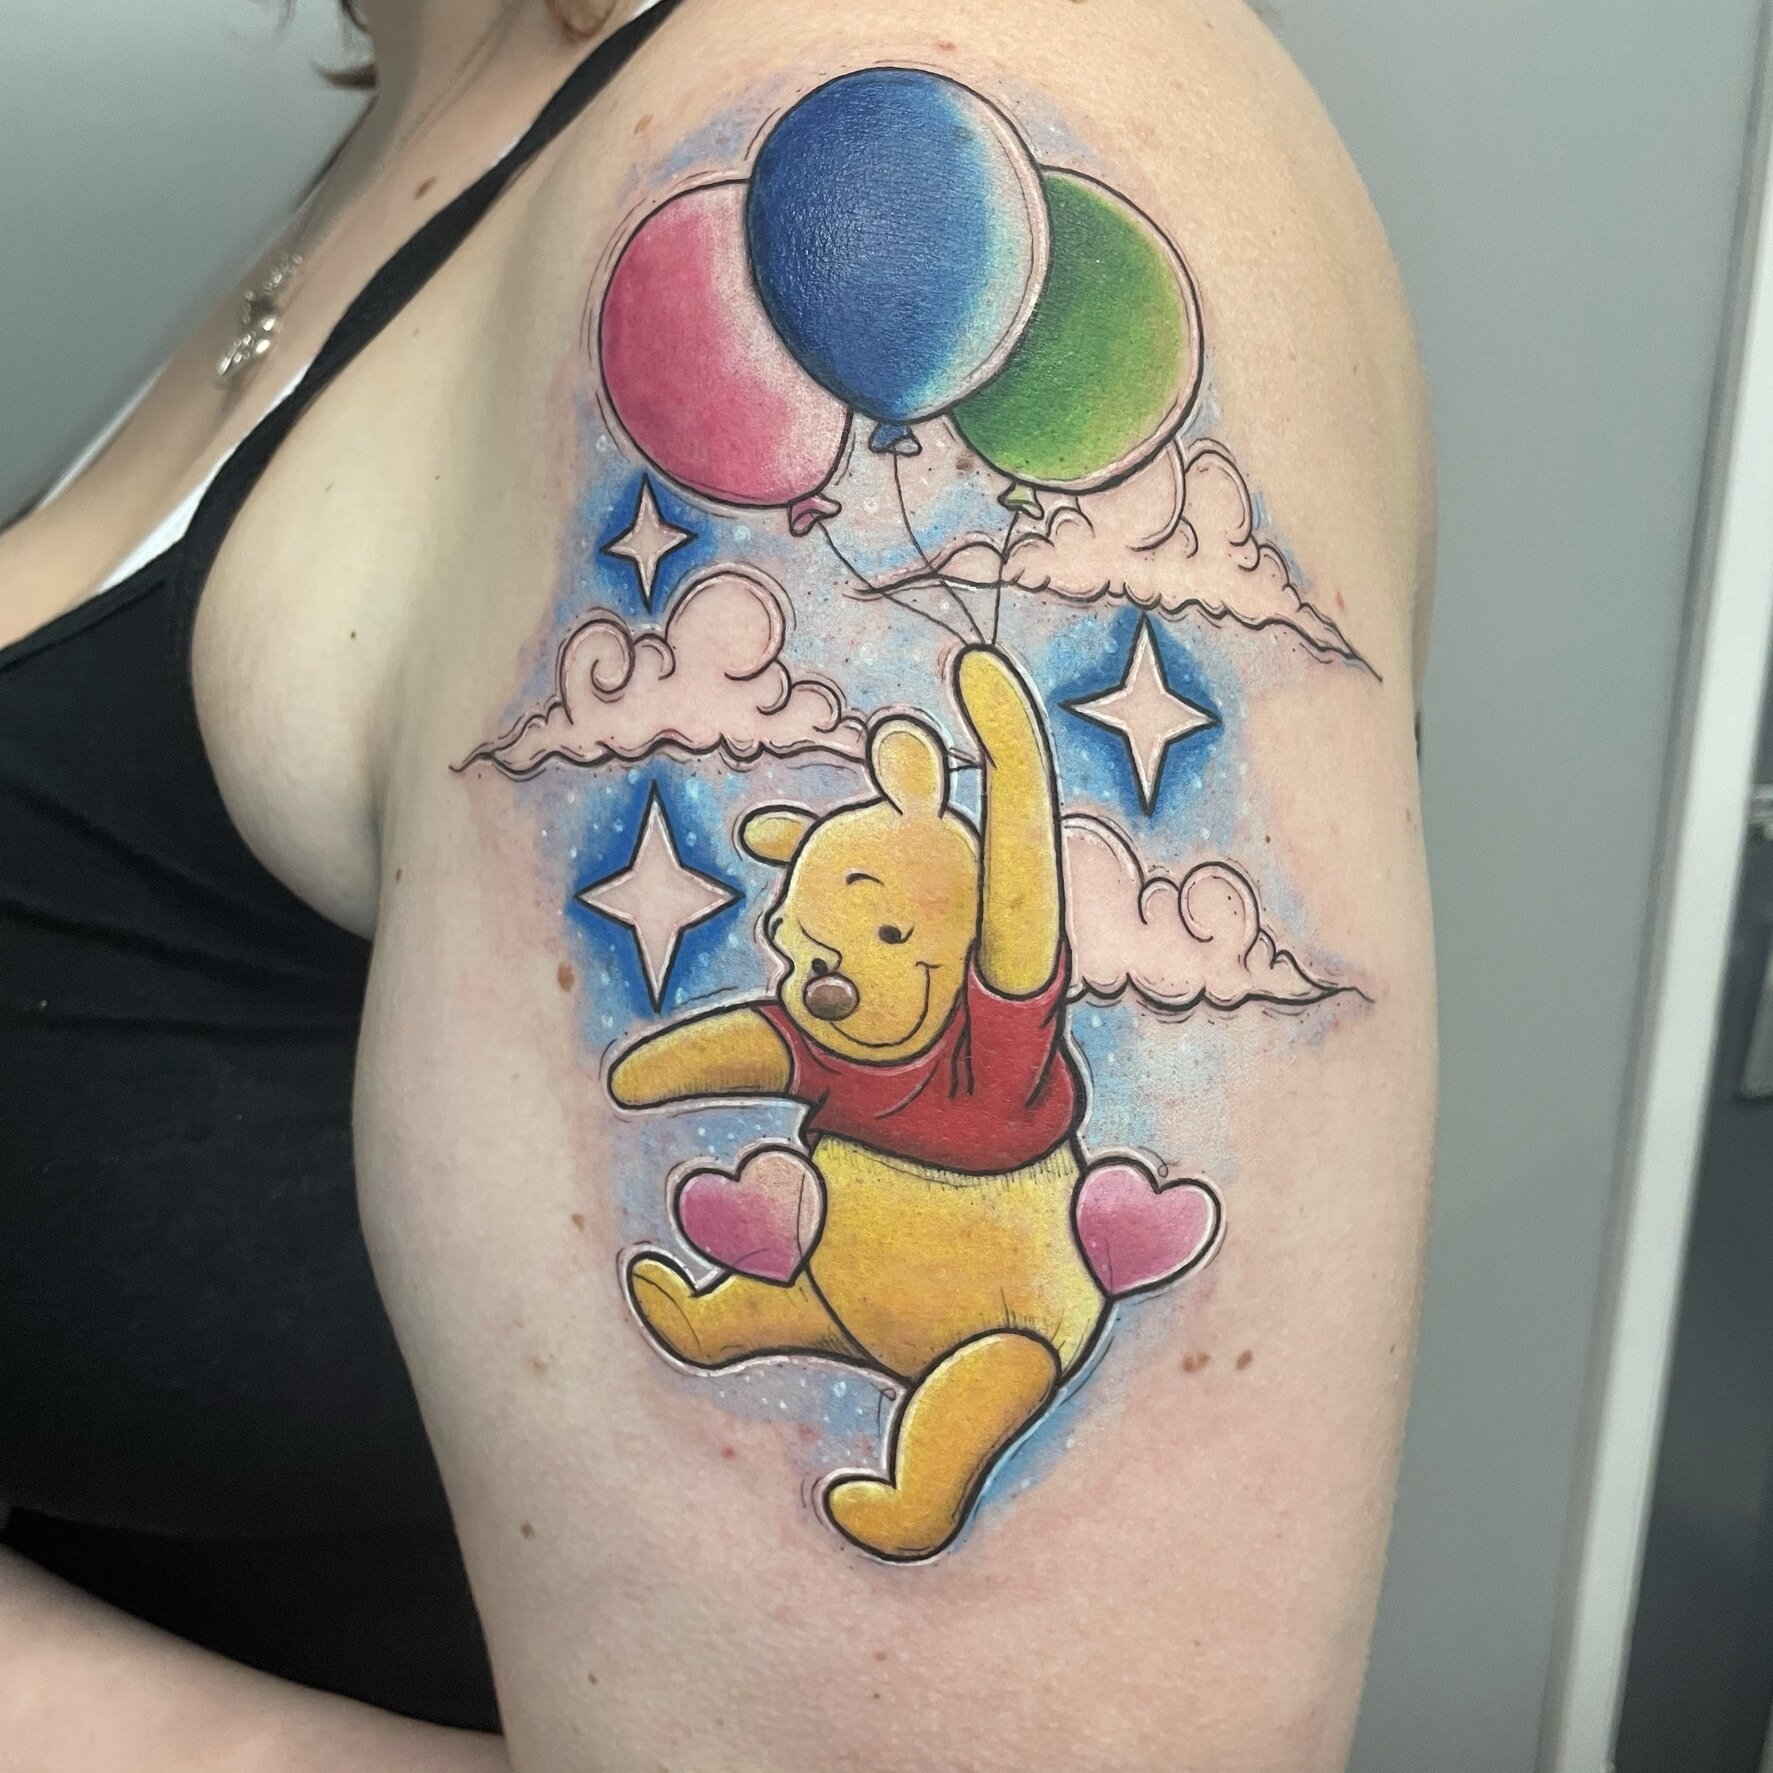 tattoo done by Mickey at American Nightmare tattoo parlor in Las Vegas. : r/ tattoos